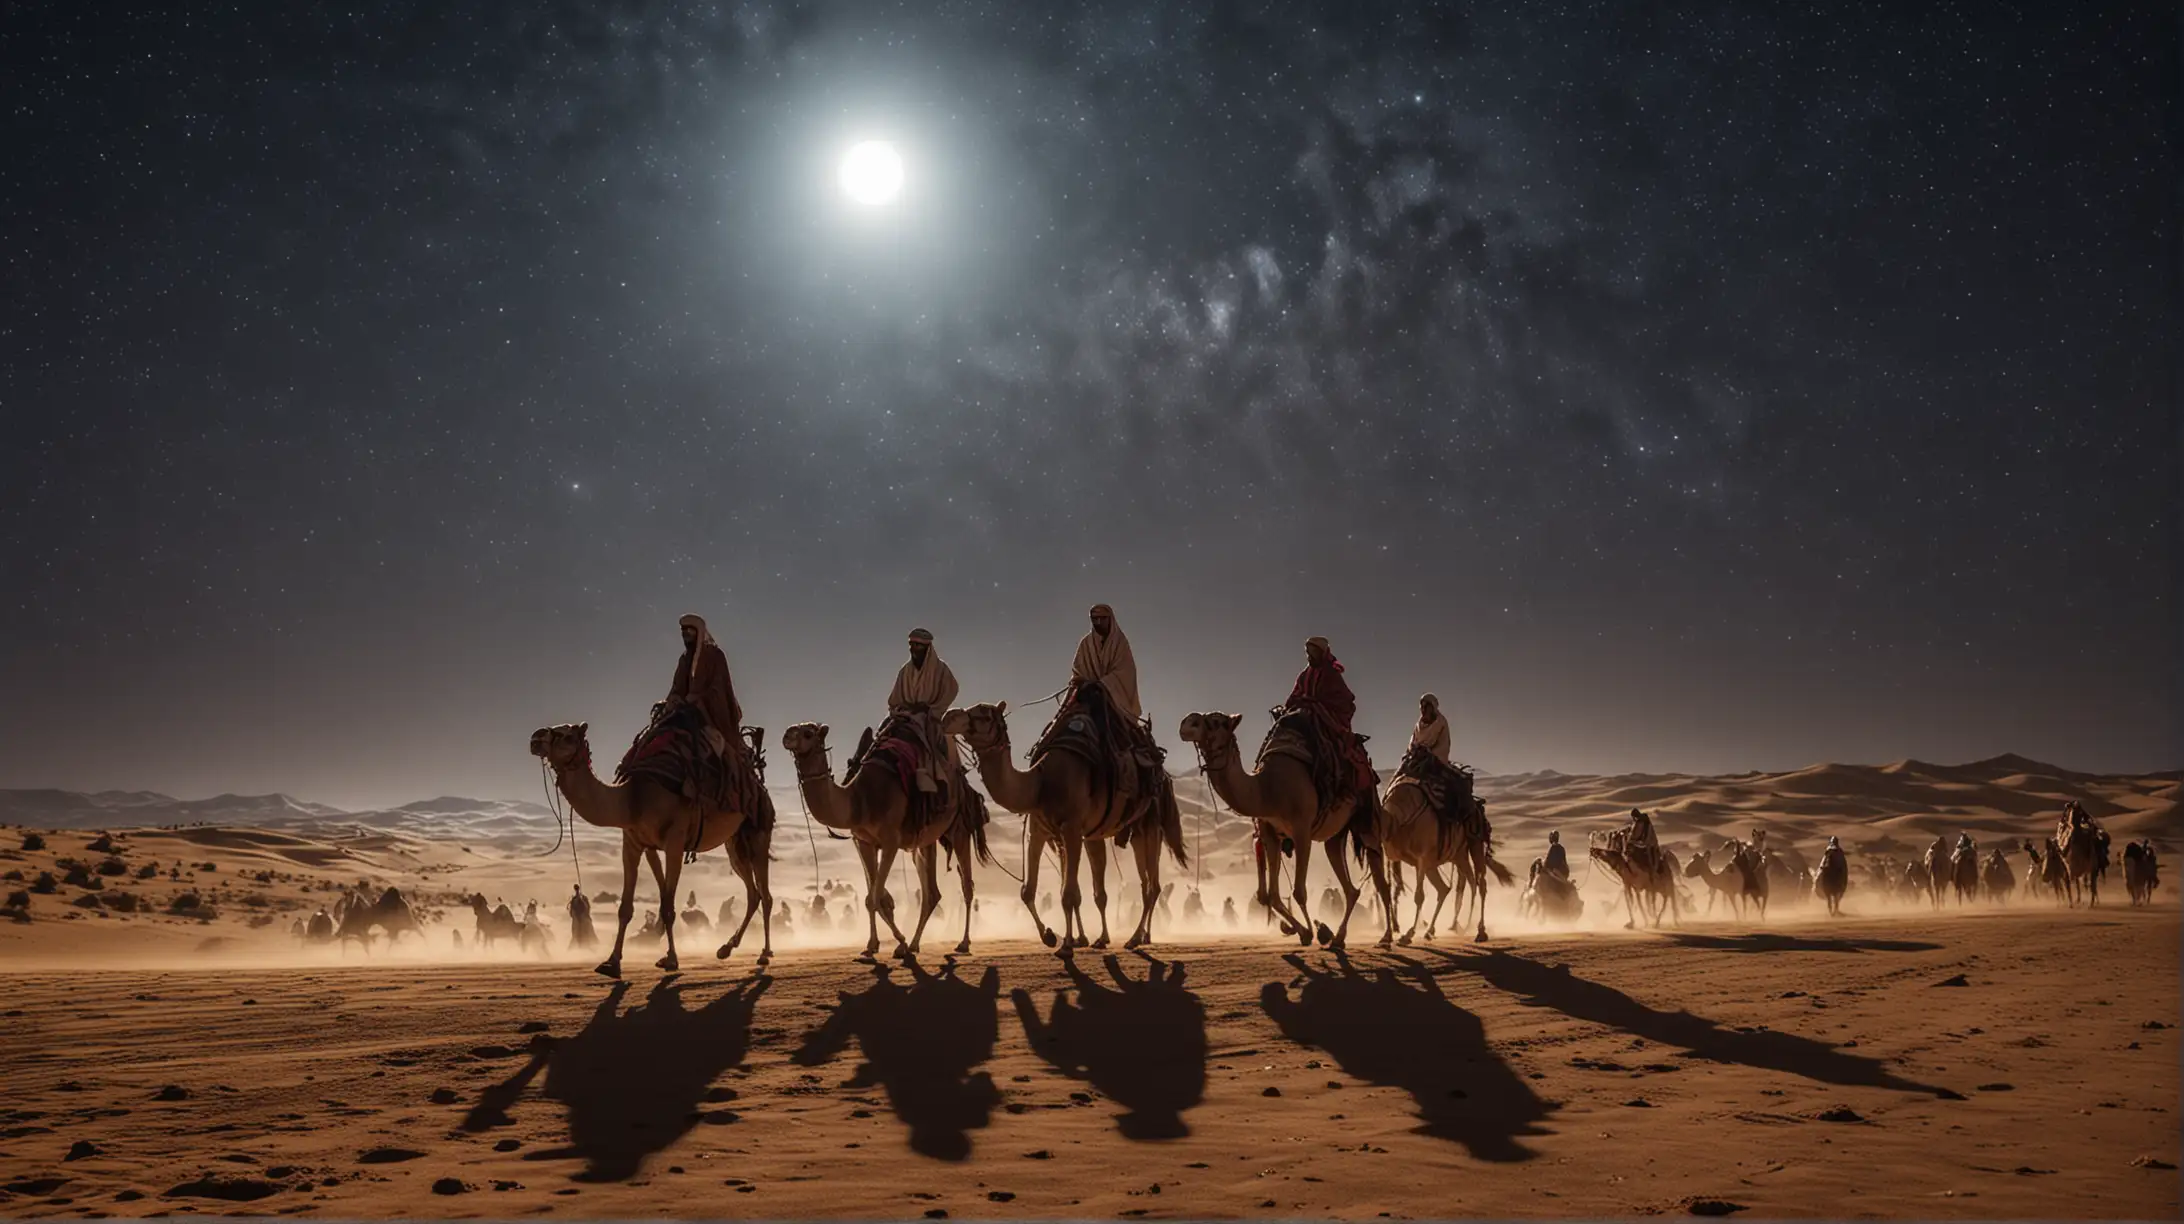 The quenn of Sheba caravan, camel and horses, people wearing ancient oriental clothes are traveling in the desert, night tine, sky full of stars, full moon, silver night light, cinematic, panoramic general view